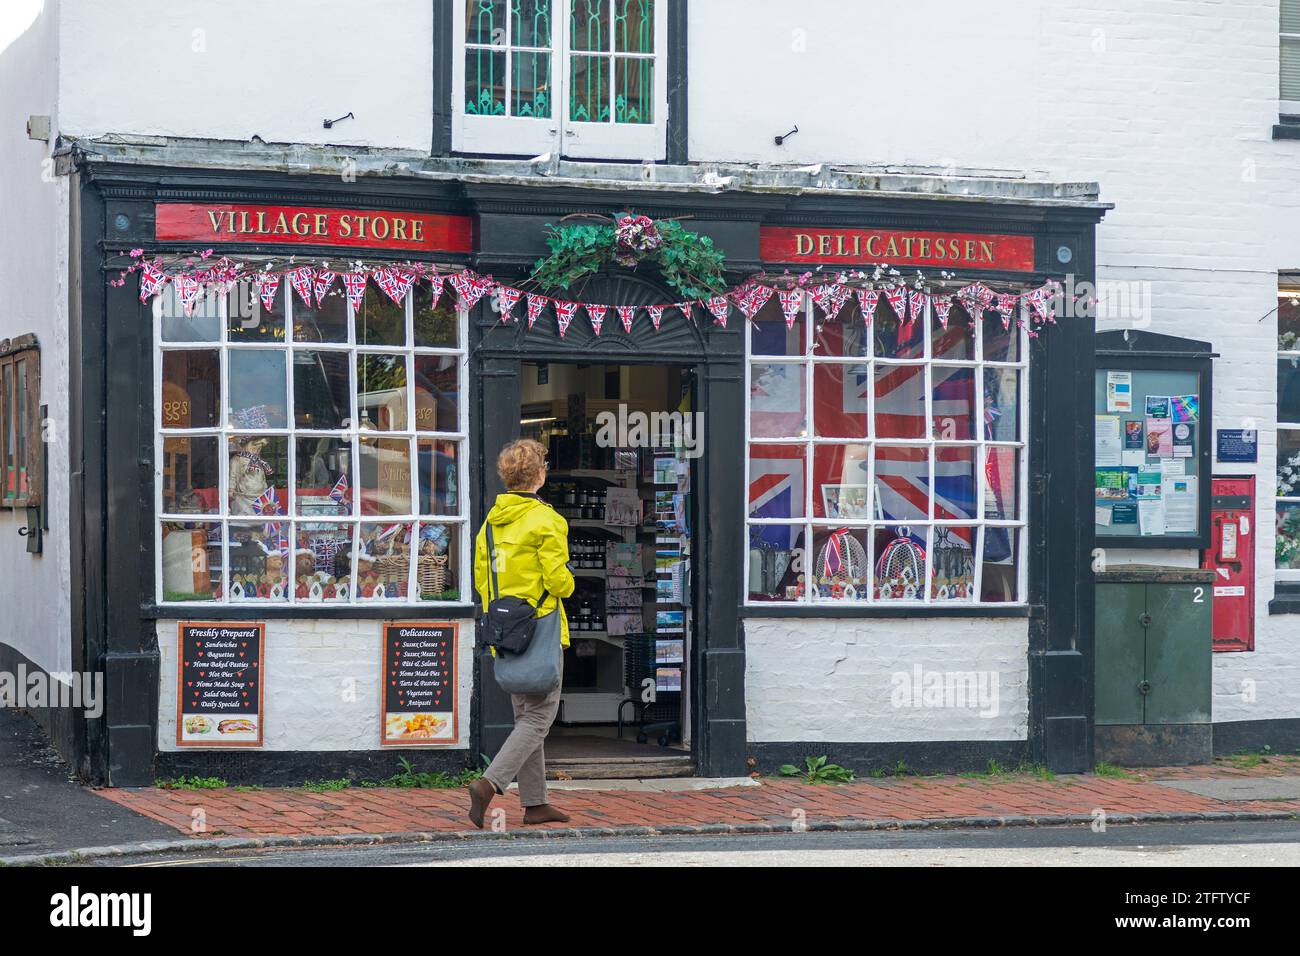 Village Store, woman, market square, Alfriston, East Sussex, England, Great Britain Stock Photo